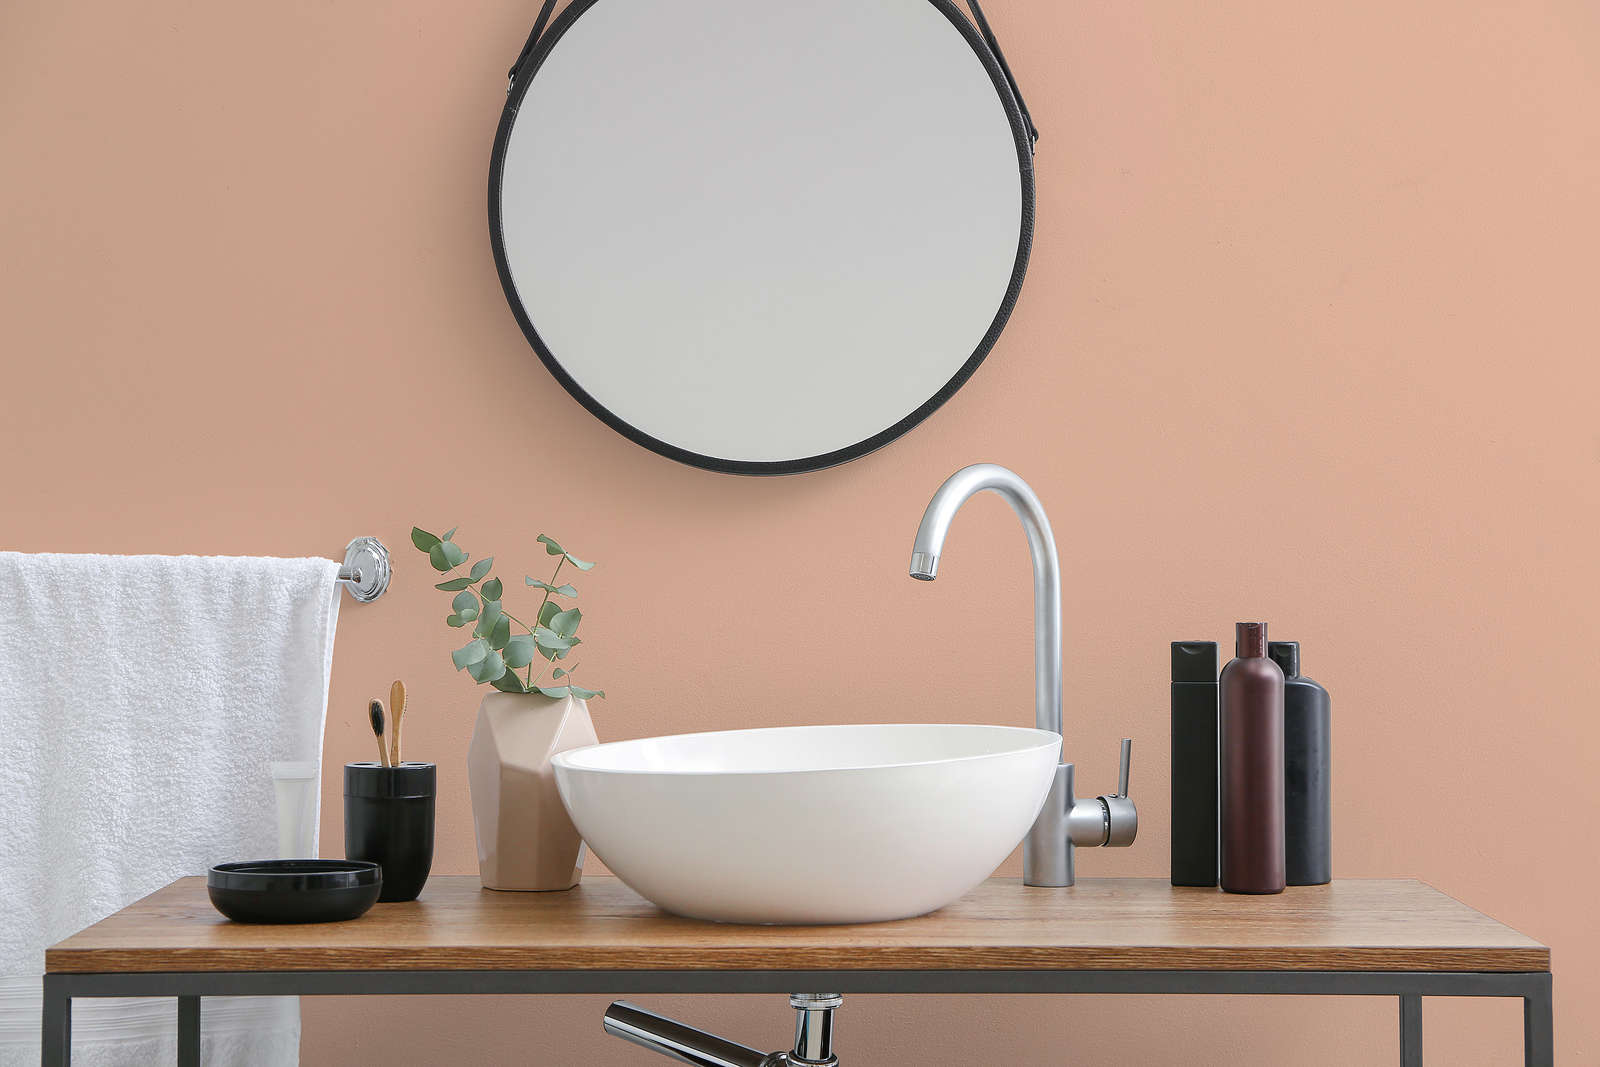             Premium Wall Paint serene salmon »Active Apricot« NW912 – 2.5 litre
        